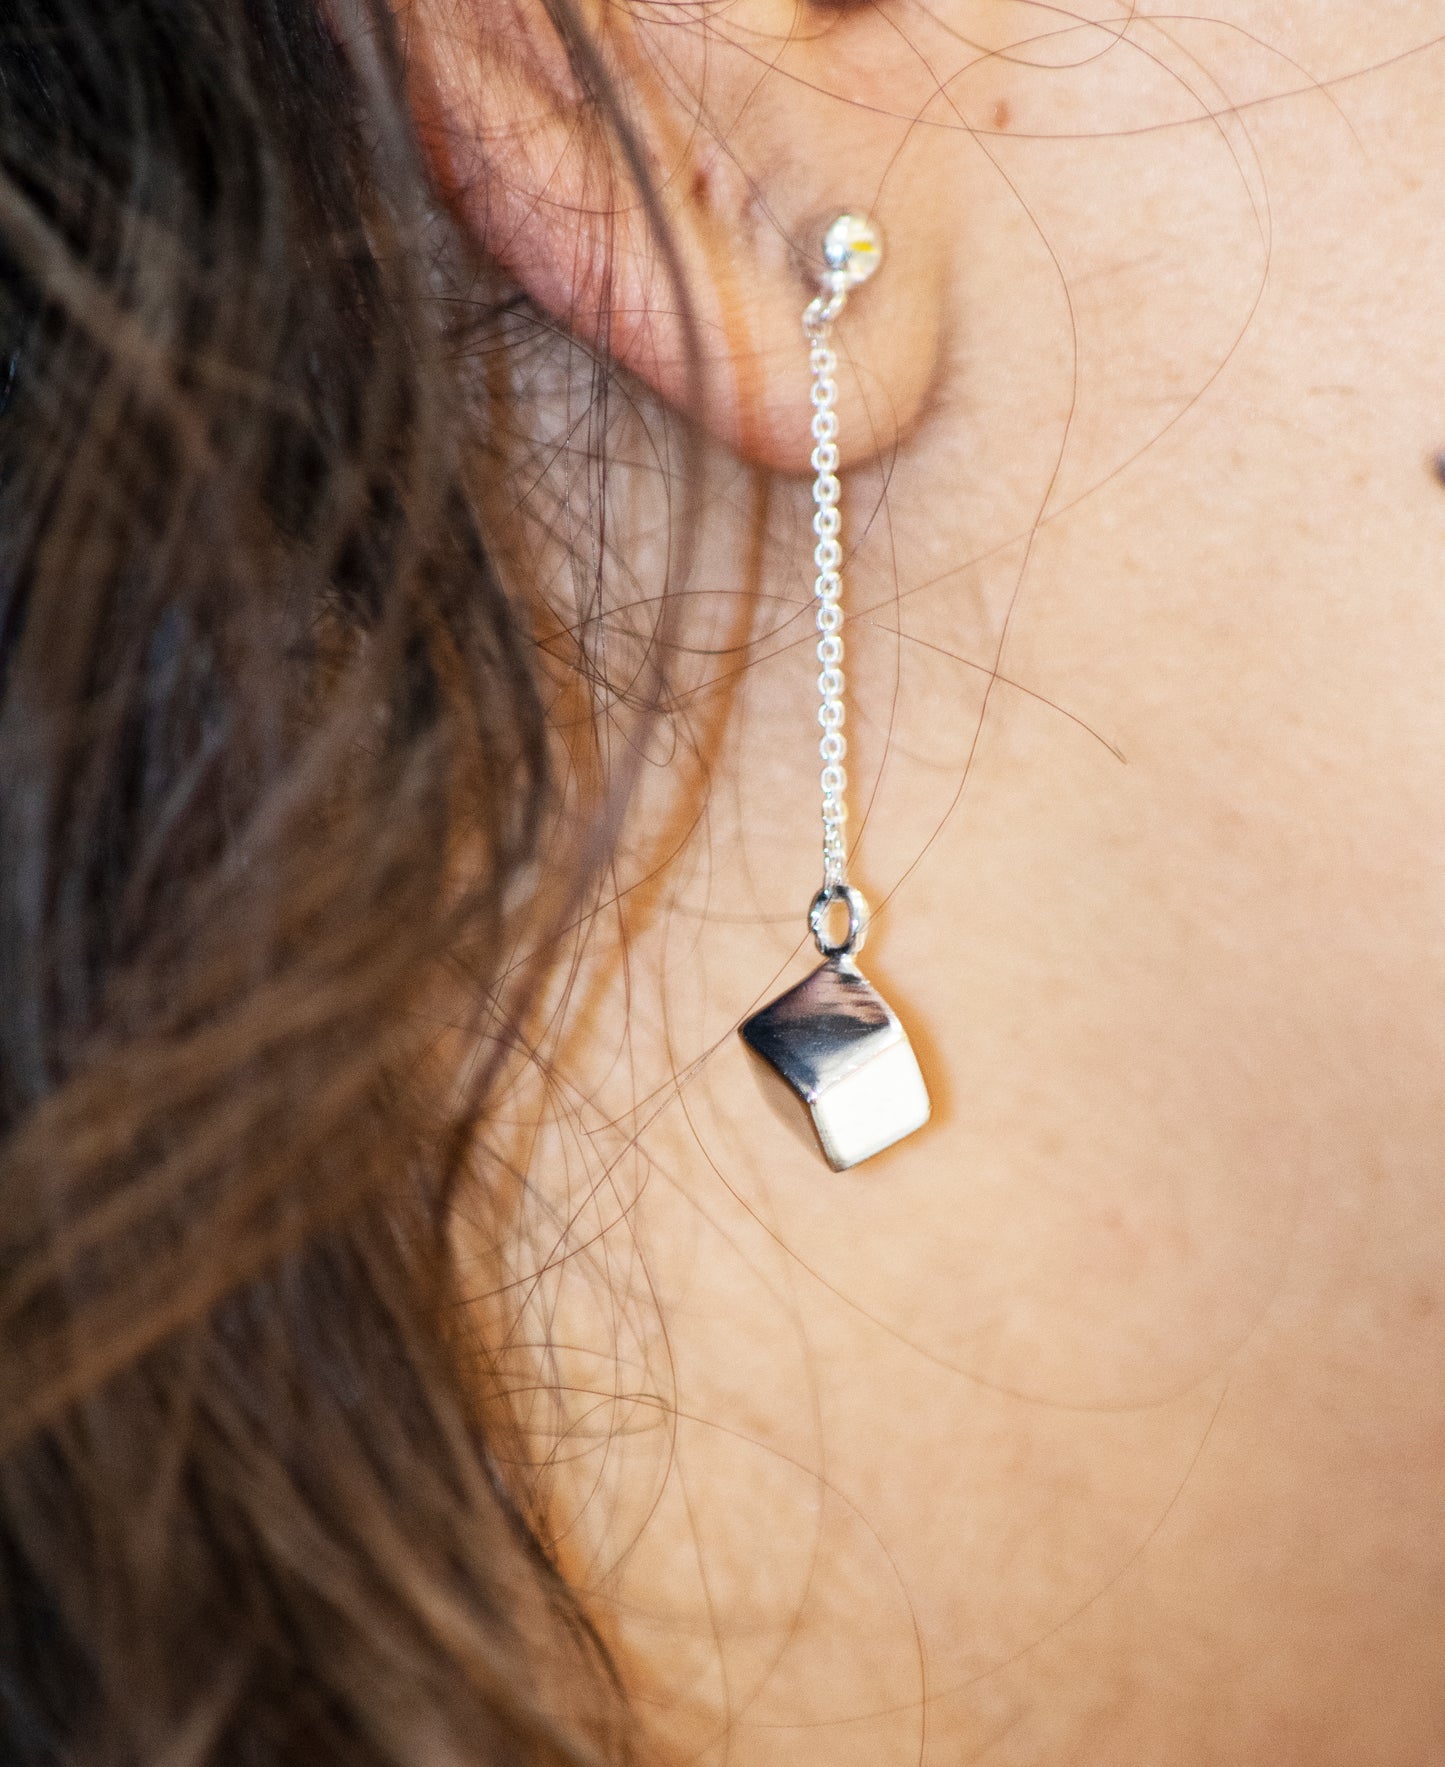 A close up of a woman's ear with Super Silver's Silver Drop Earrings with a Solid Cube.